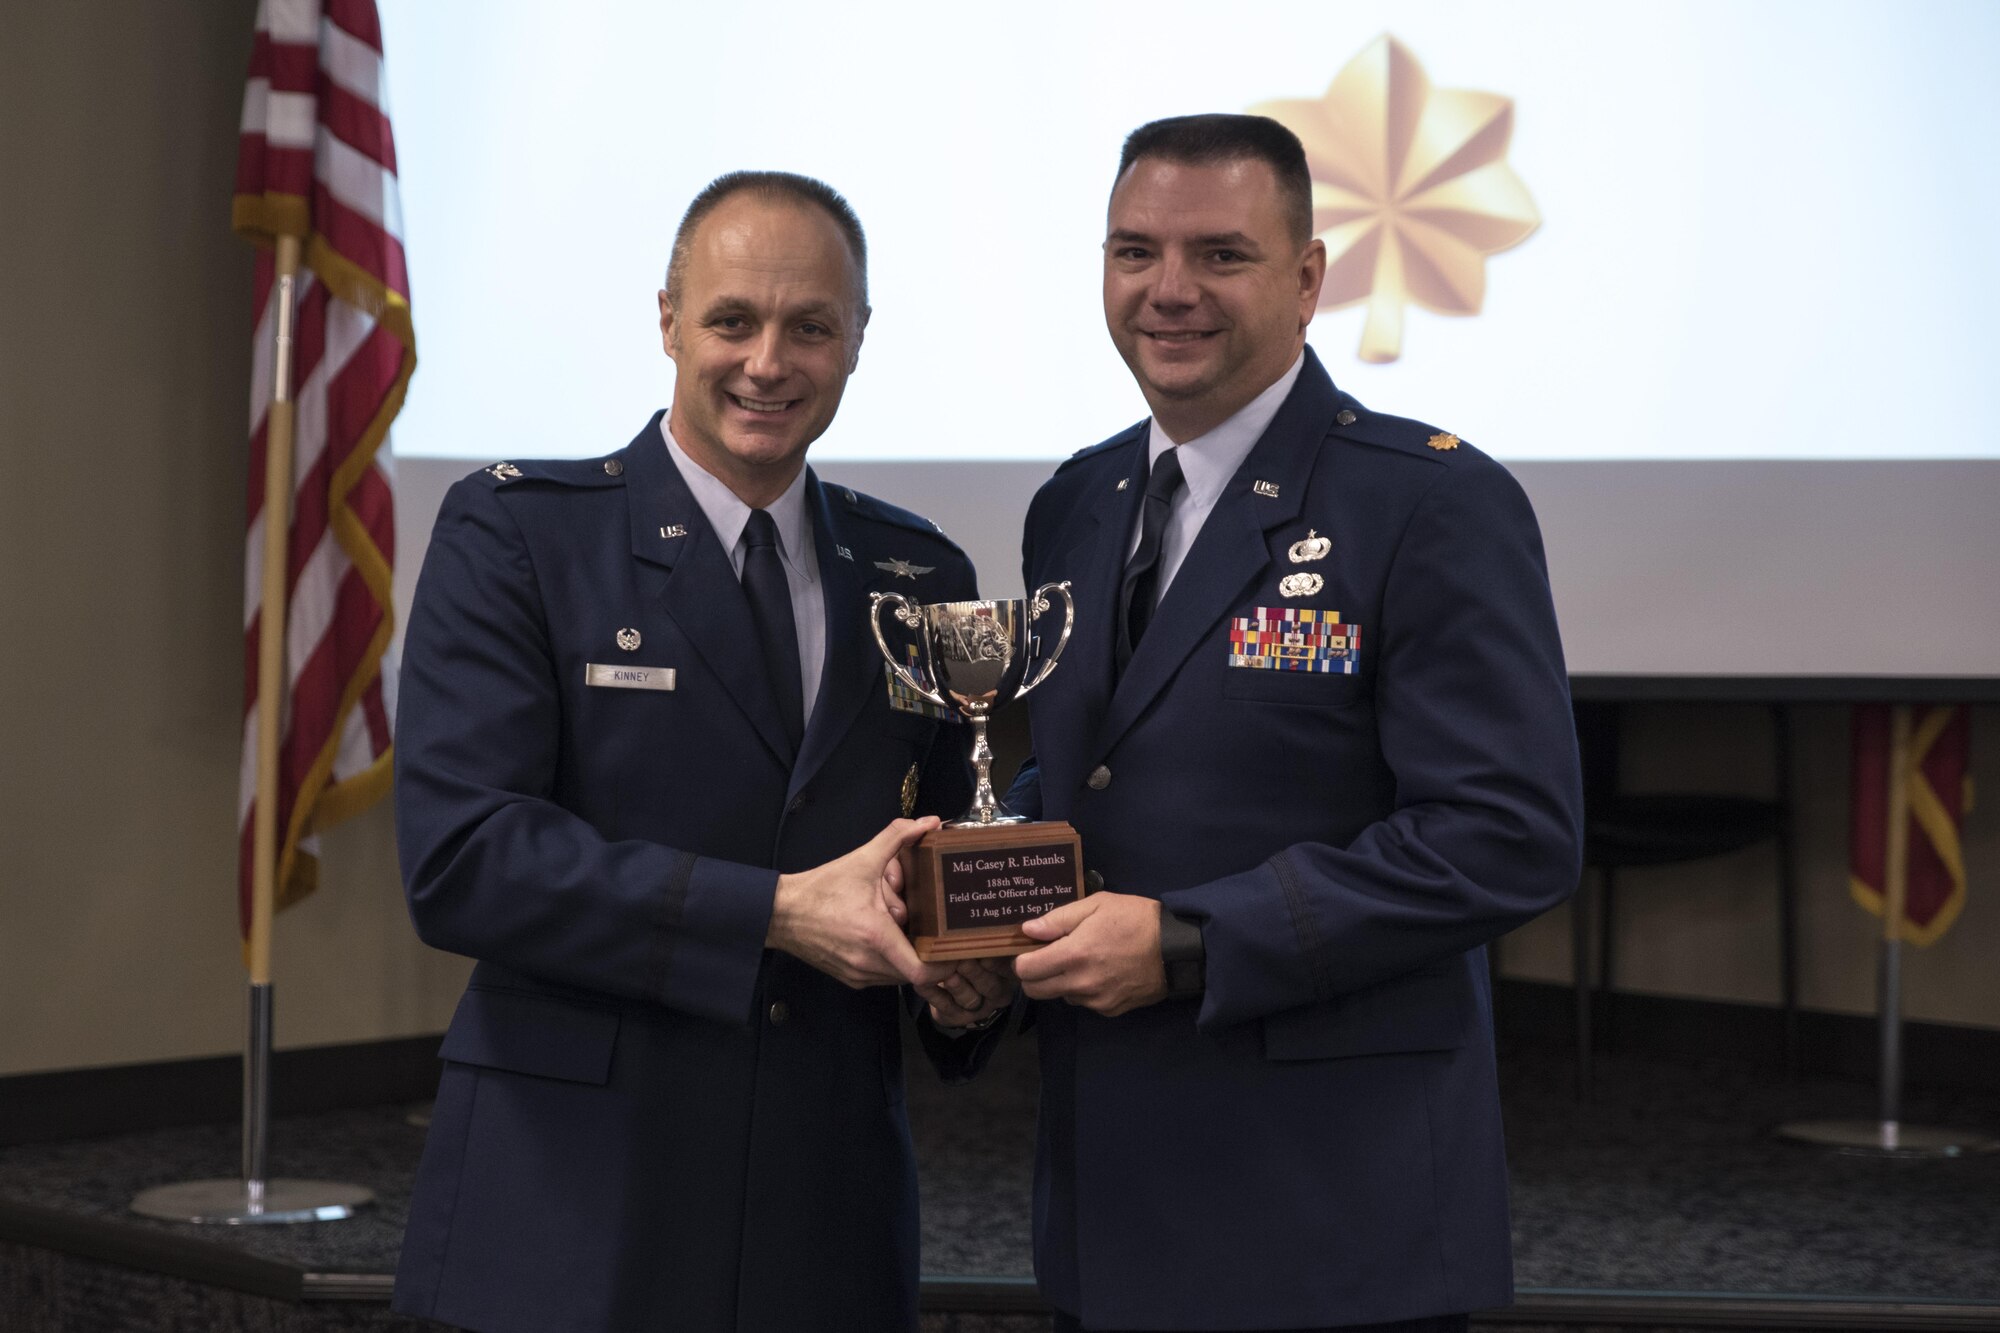 Maj. Casey Eubanks accepts the Field Grade Officer of the Year award from Col. Robert Kinney, 188th Wing commander, Nov. 4, 2017, at Ebbing Air National Guard Base, Fort Smith, Ark. The award is given to airmen that have provided exceptional service to the wing throughout the last year and distinguished themselves among the best in the 188th. Winners were selected in the Airman, Noncommissioned Officer, Senior NCO, First Sergeant, CGO and Field Grade Officer categories. (U.S. Air National Guard photo by Tech. Sgt. Daniel Condit)